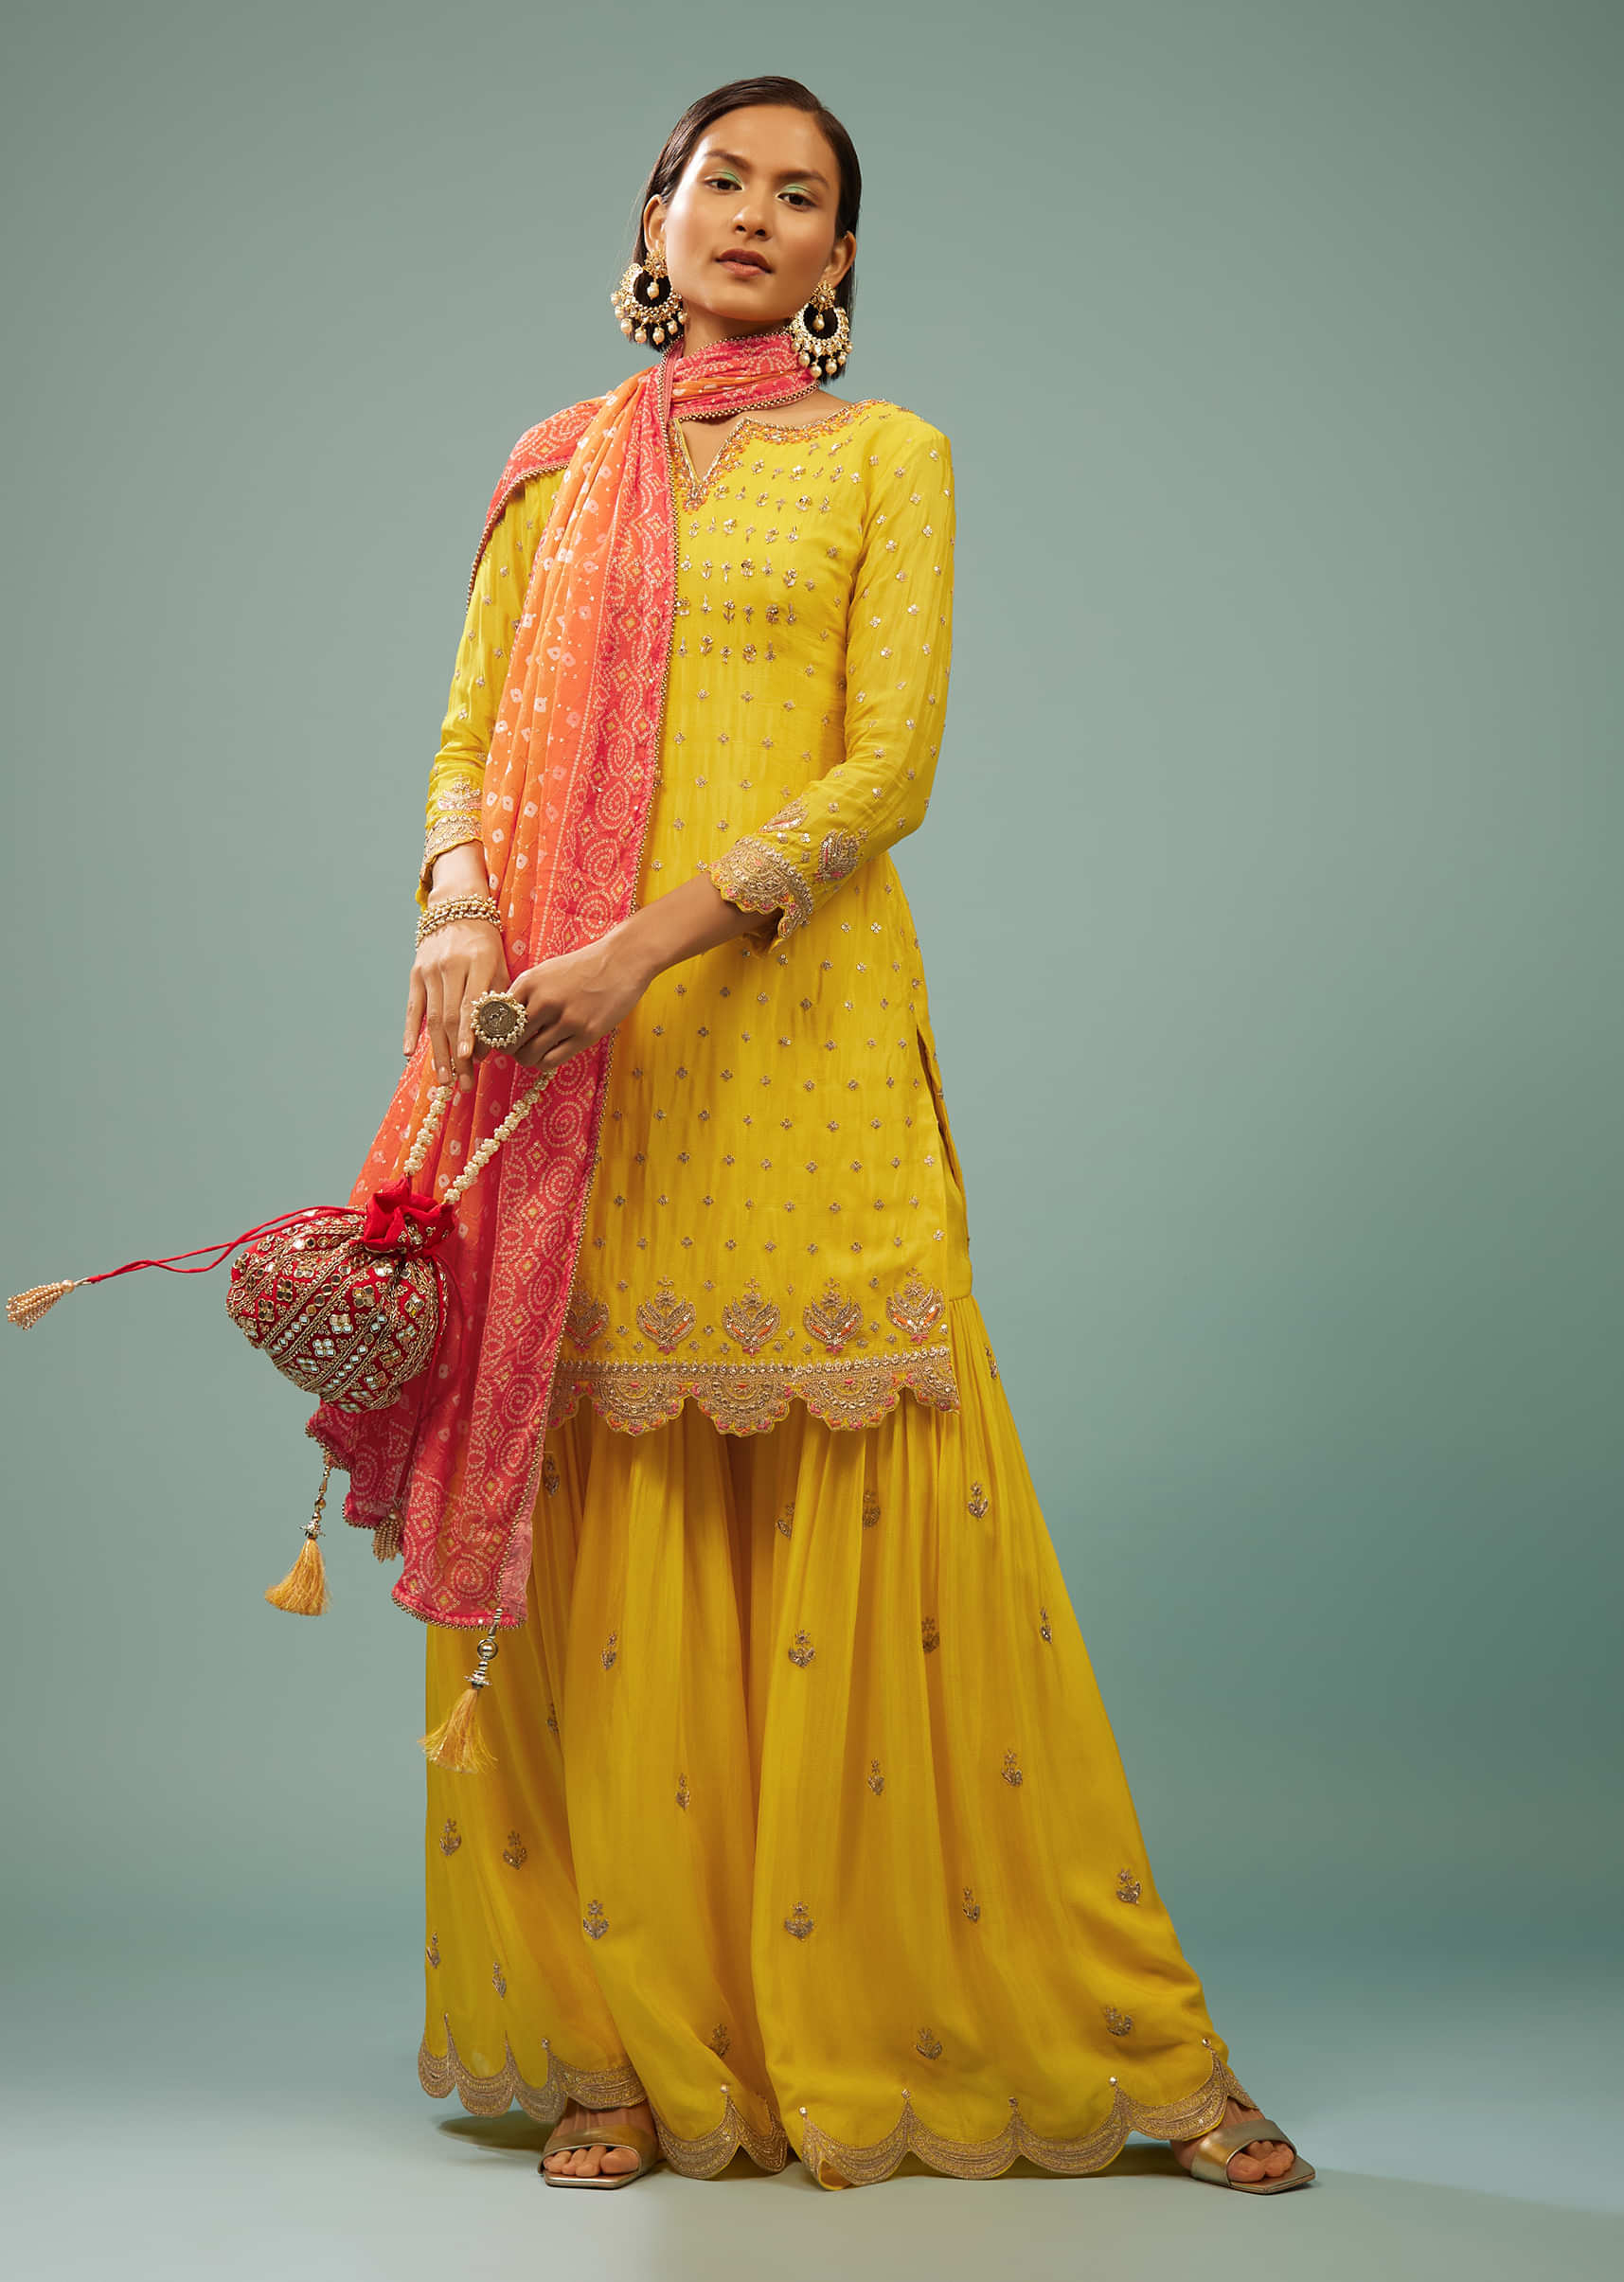 Kalki Cyber Yellow Sharara Suit With Embroidery And Bandhani Dupatta